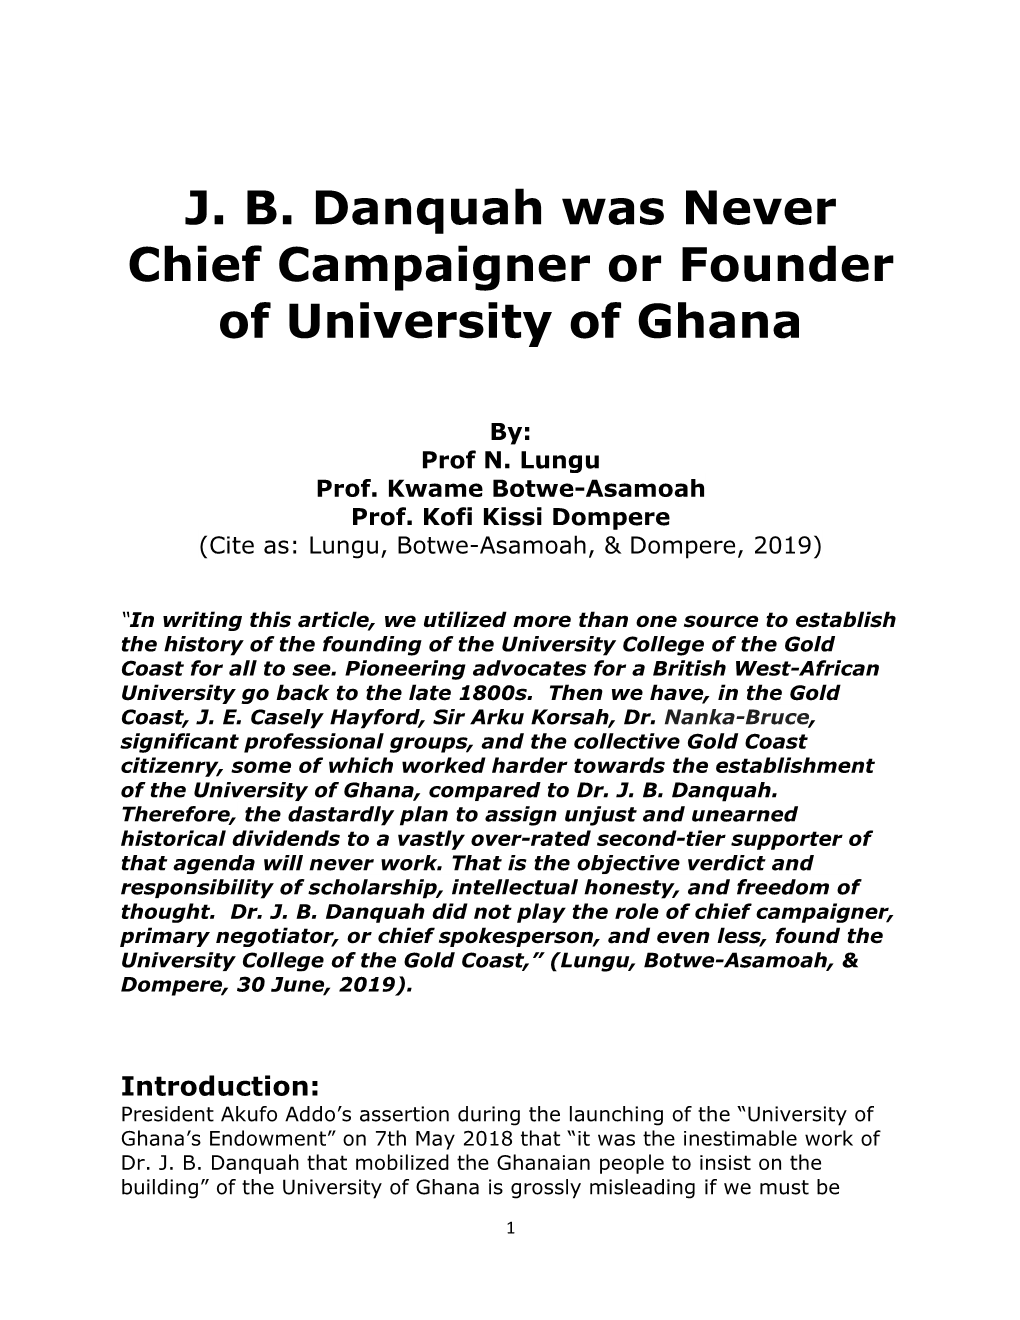 J. B. Danquah Was Never Chief Campaigner Or Founder of University of Ghana